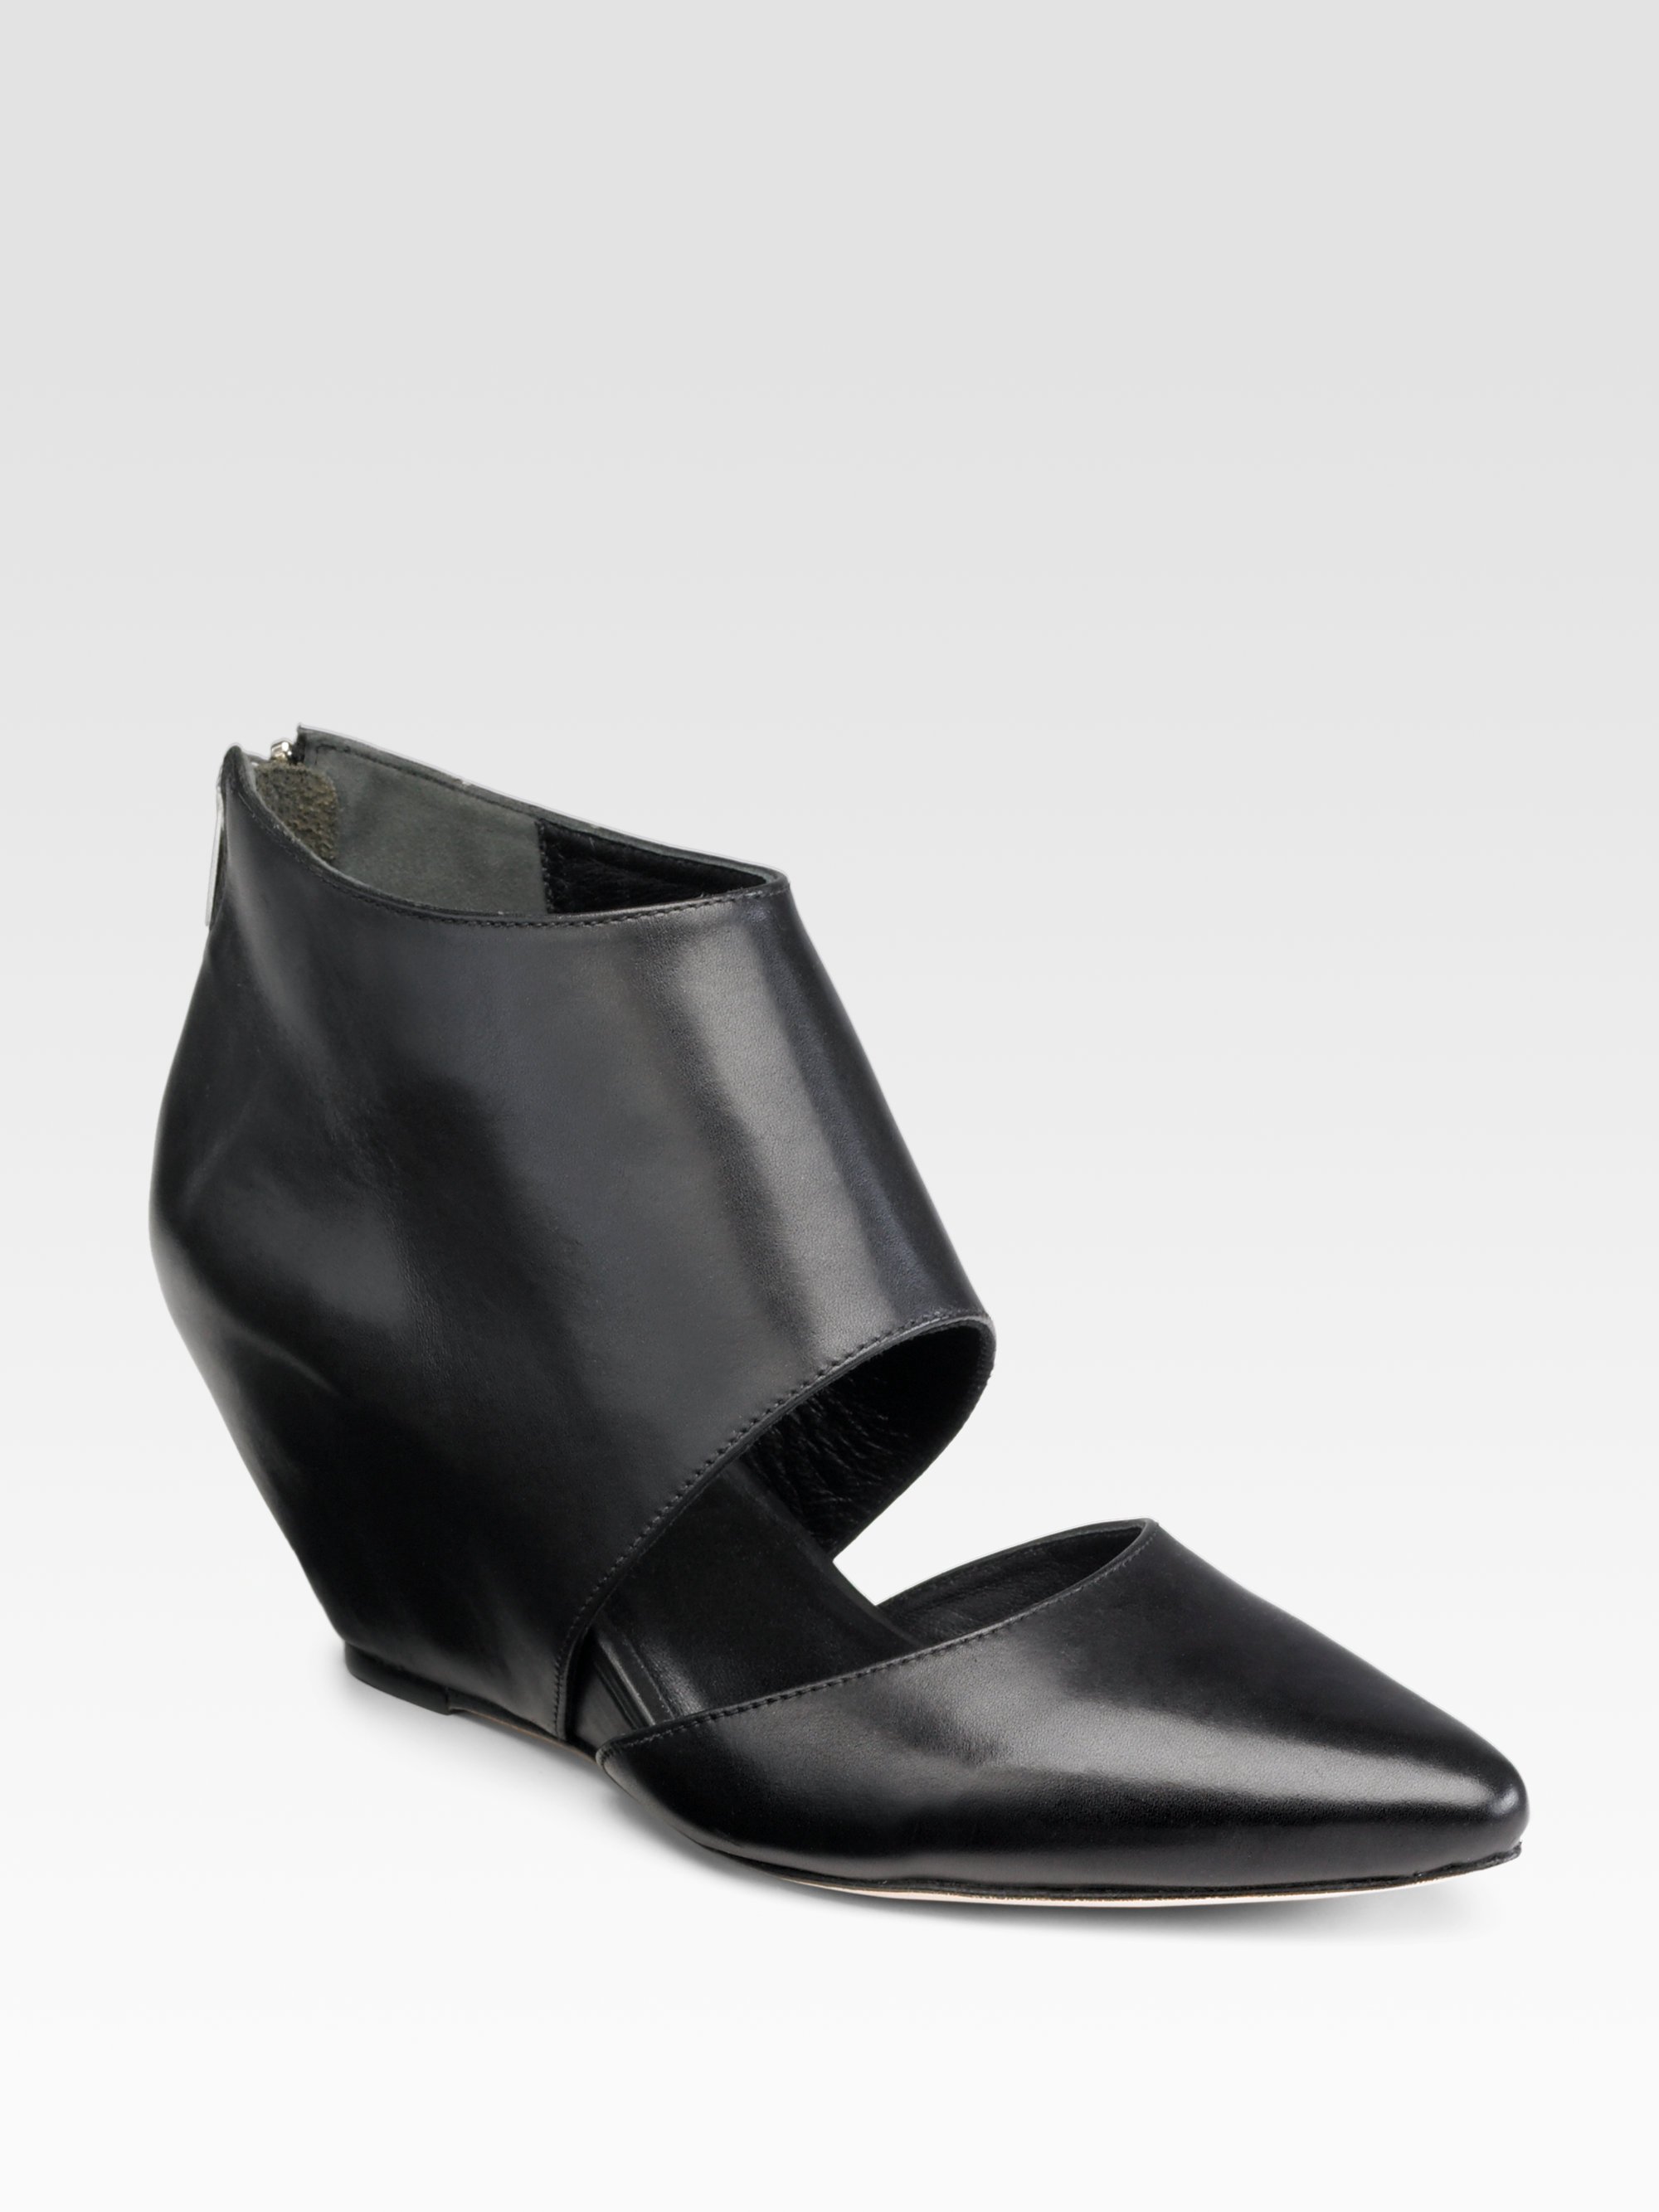 Loeffler Randall Low Cutout Wedge Ankle Boots in Black | Lyst